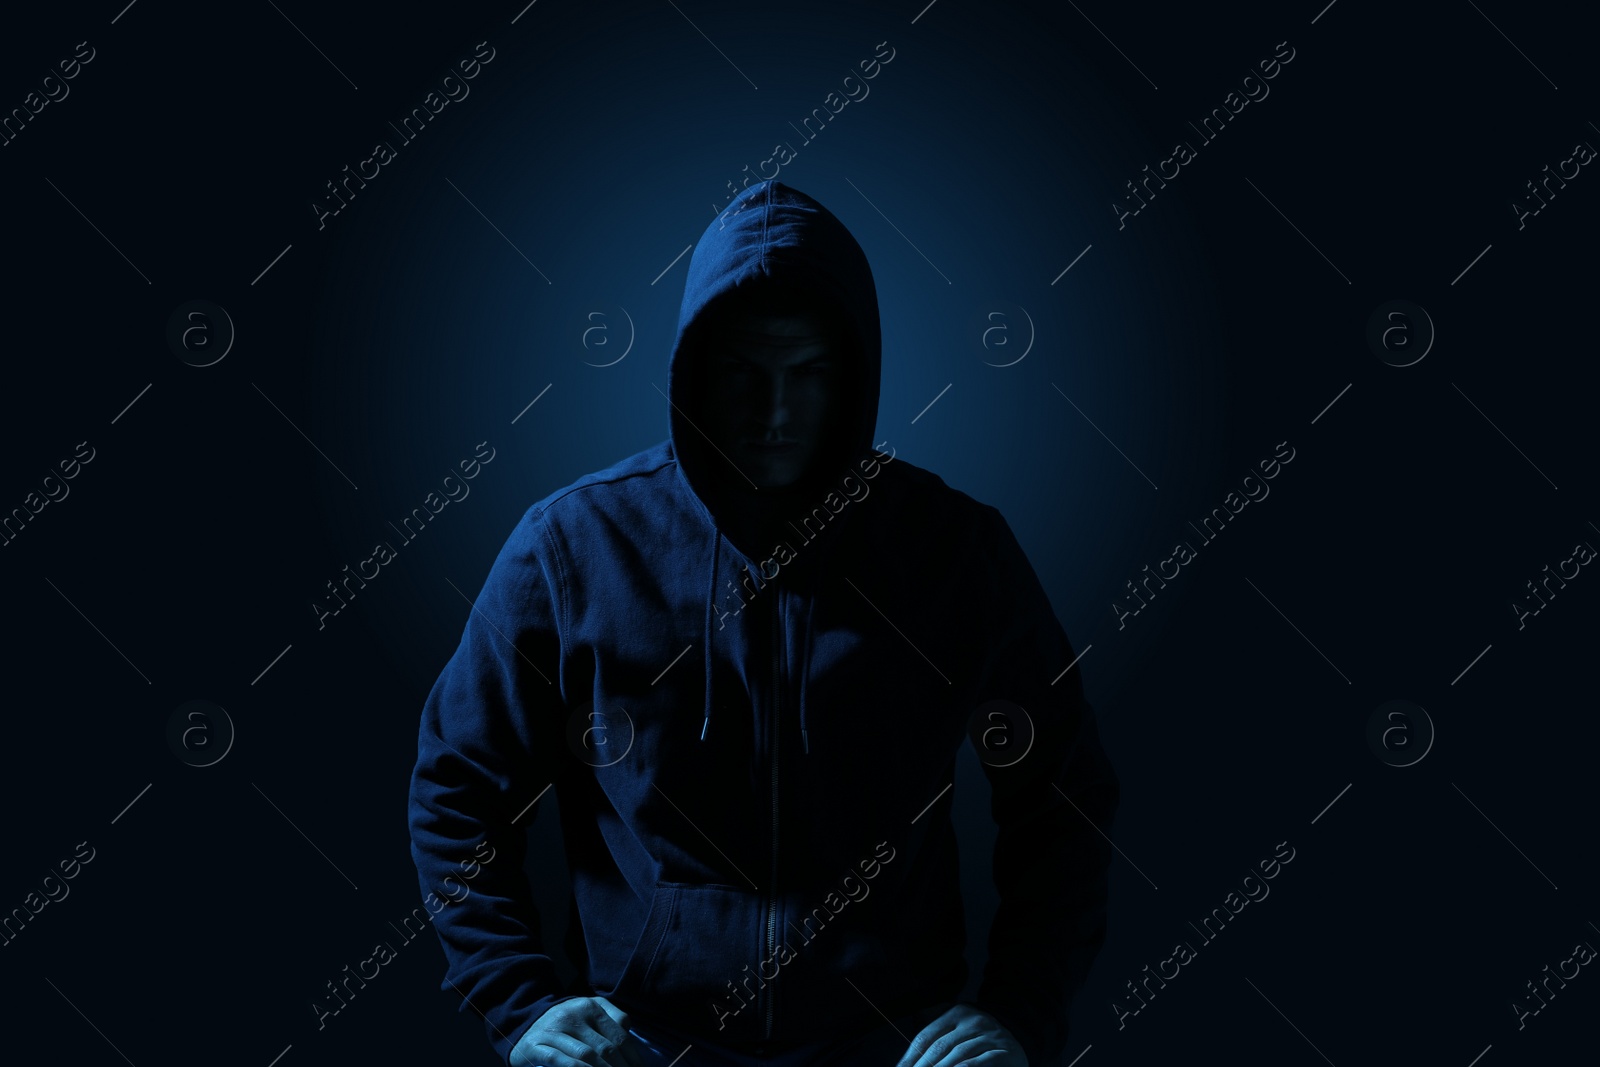 Photo of Silhouette of anonymous man on dark background, toned in blue